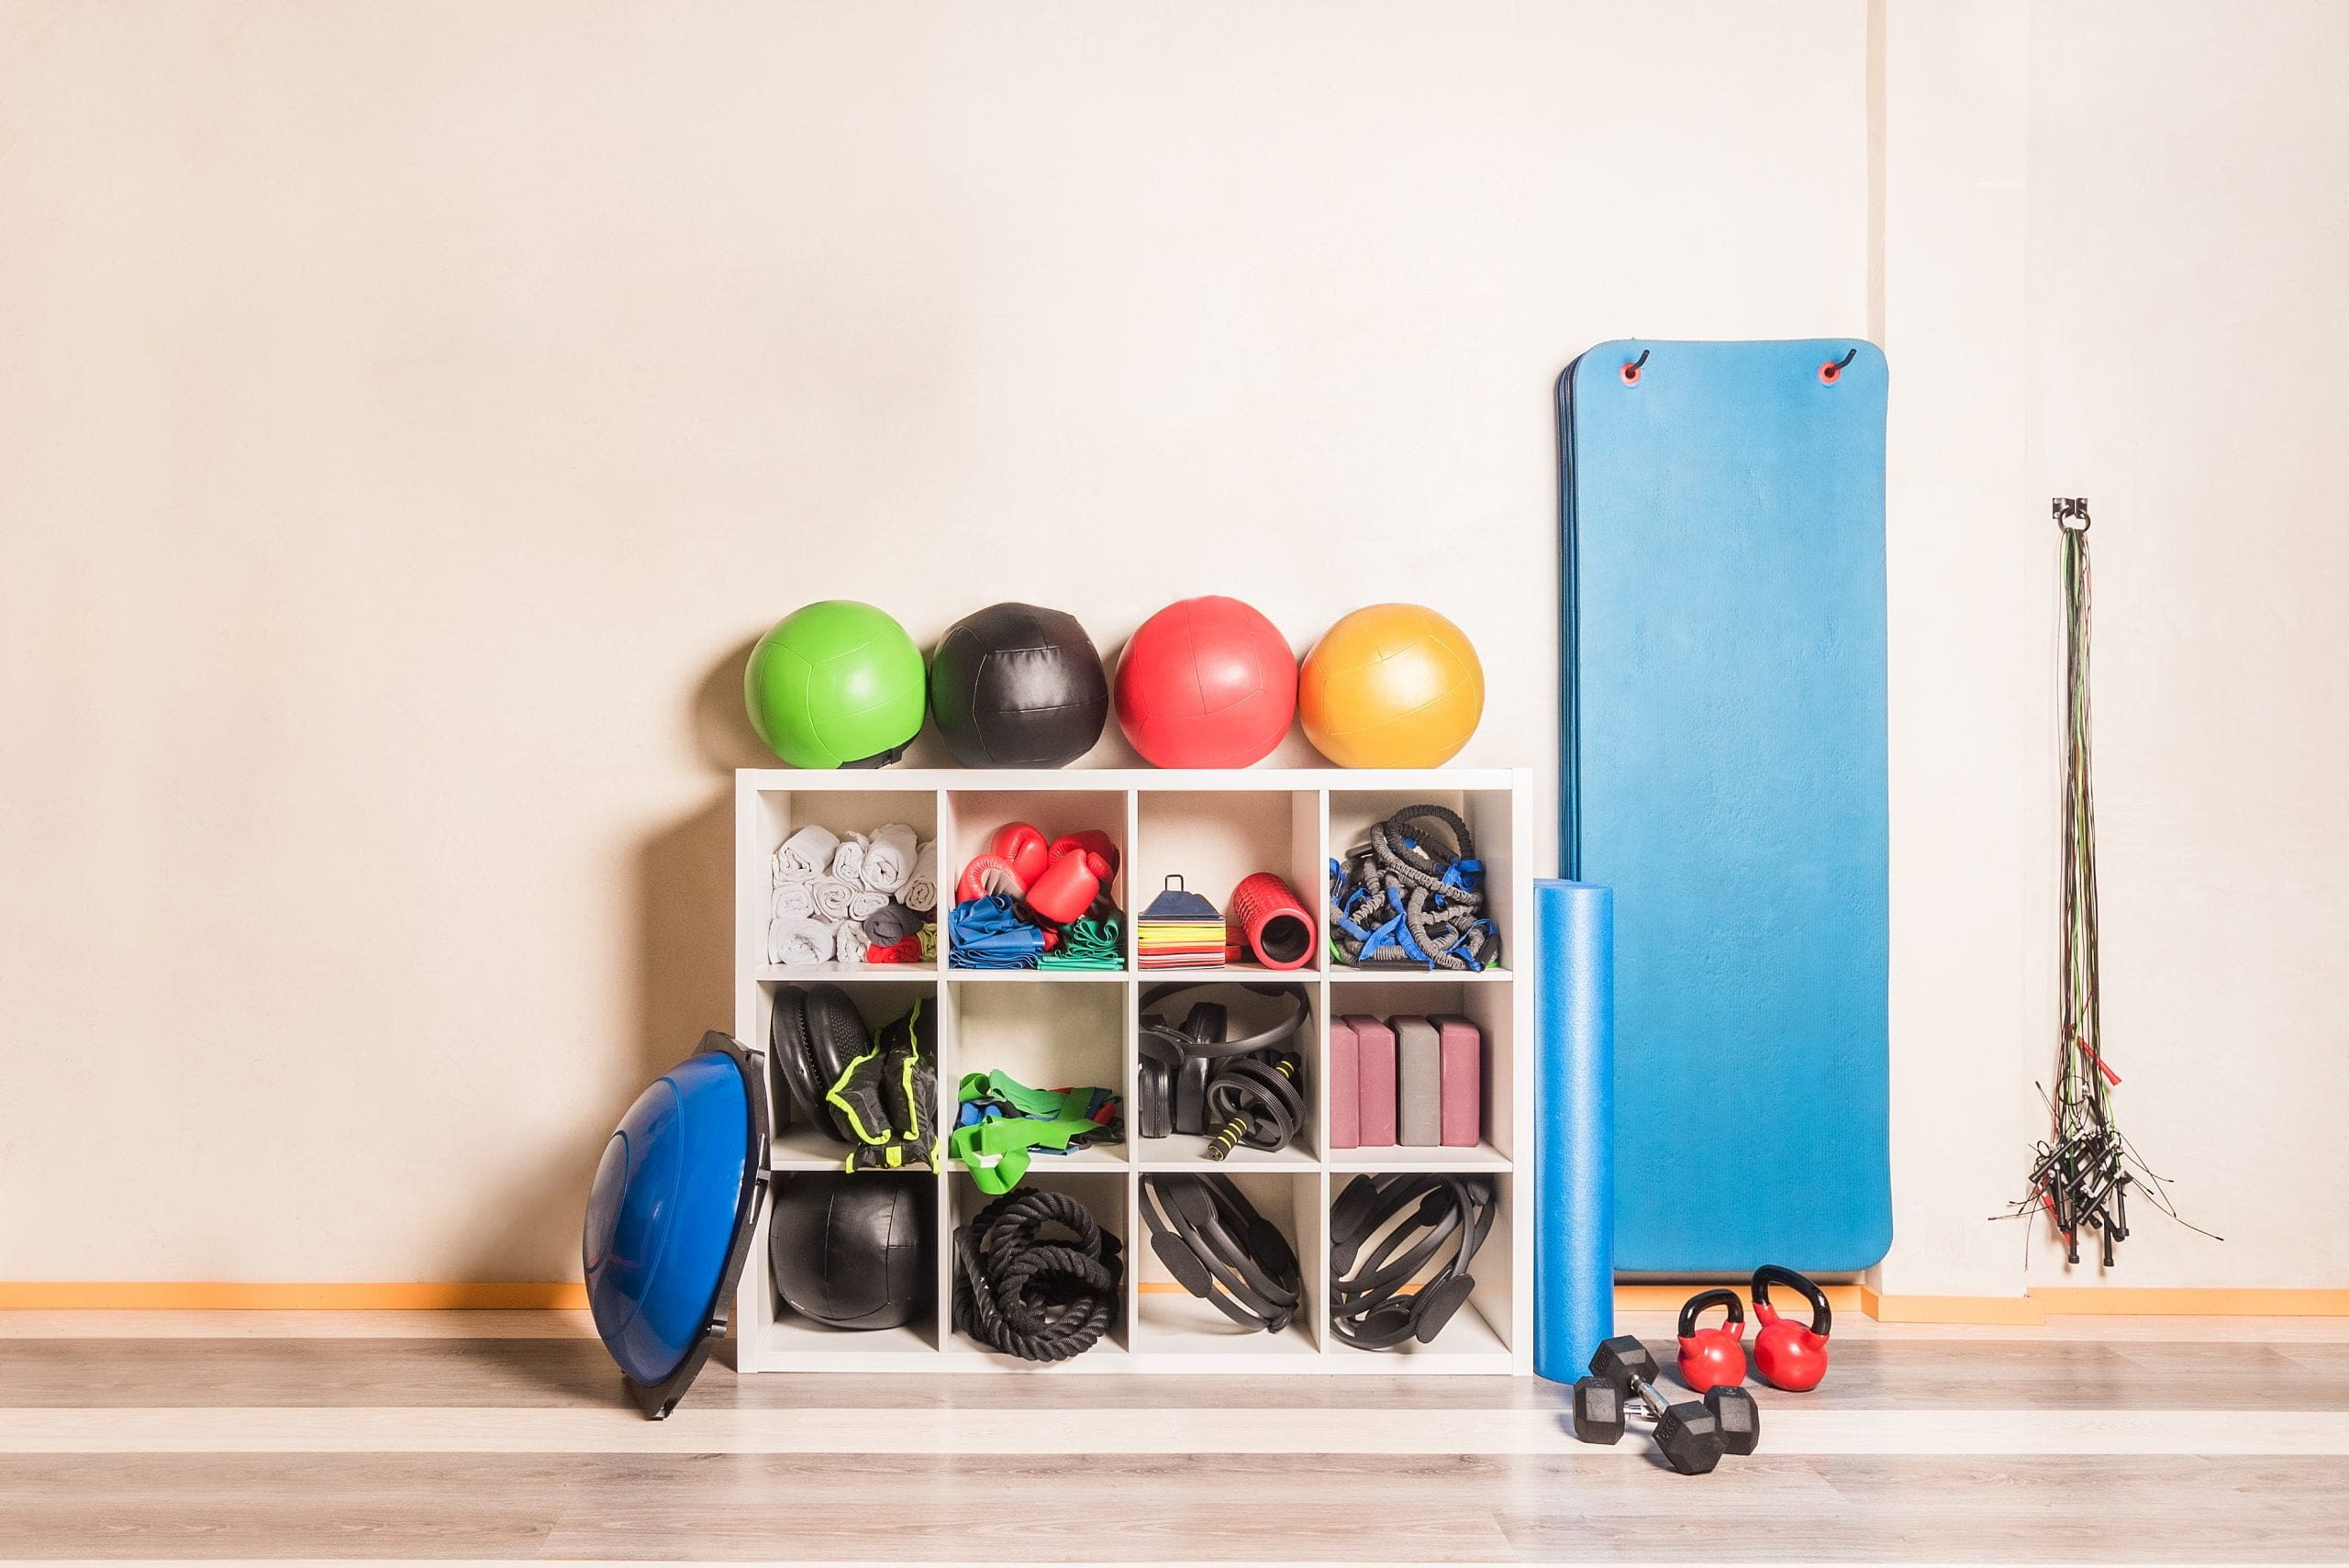 front-view-gym-equipment-arranged-shelves-wall-concept-gym-equipment.